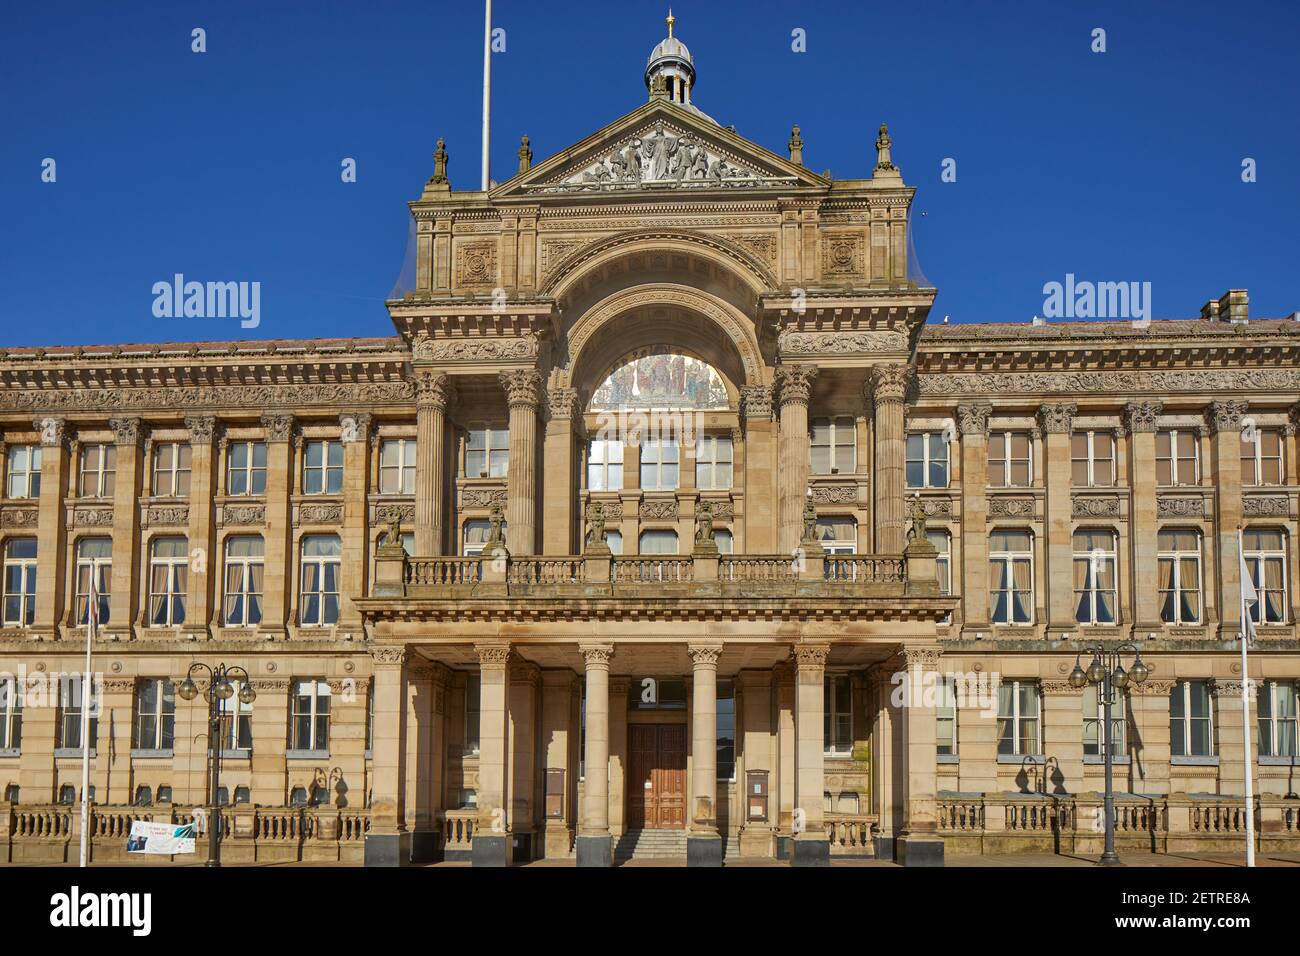 Birmingham city centre landmark Grade II* listed Council House, Victoria Square, and The River, better known as The Floozie in the Jacuzzi Stock Photo